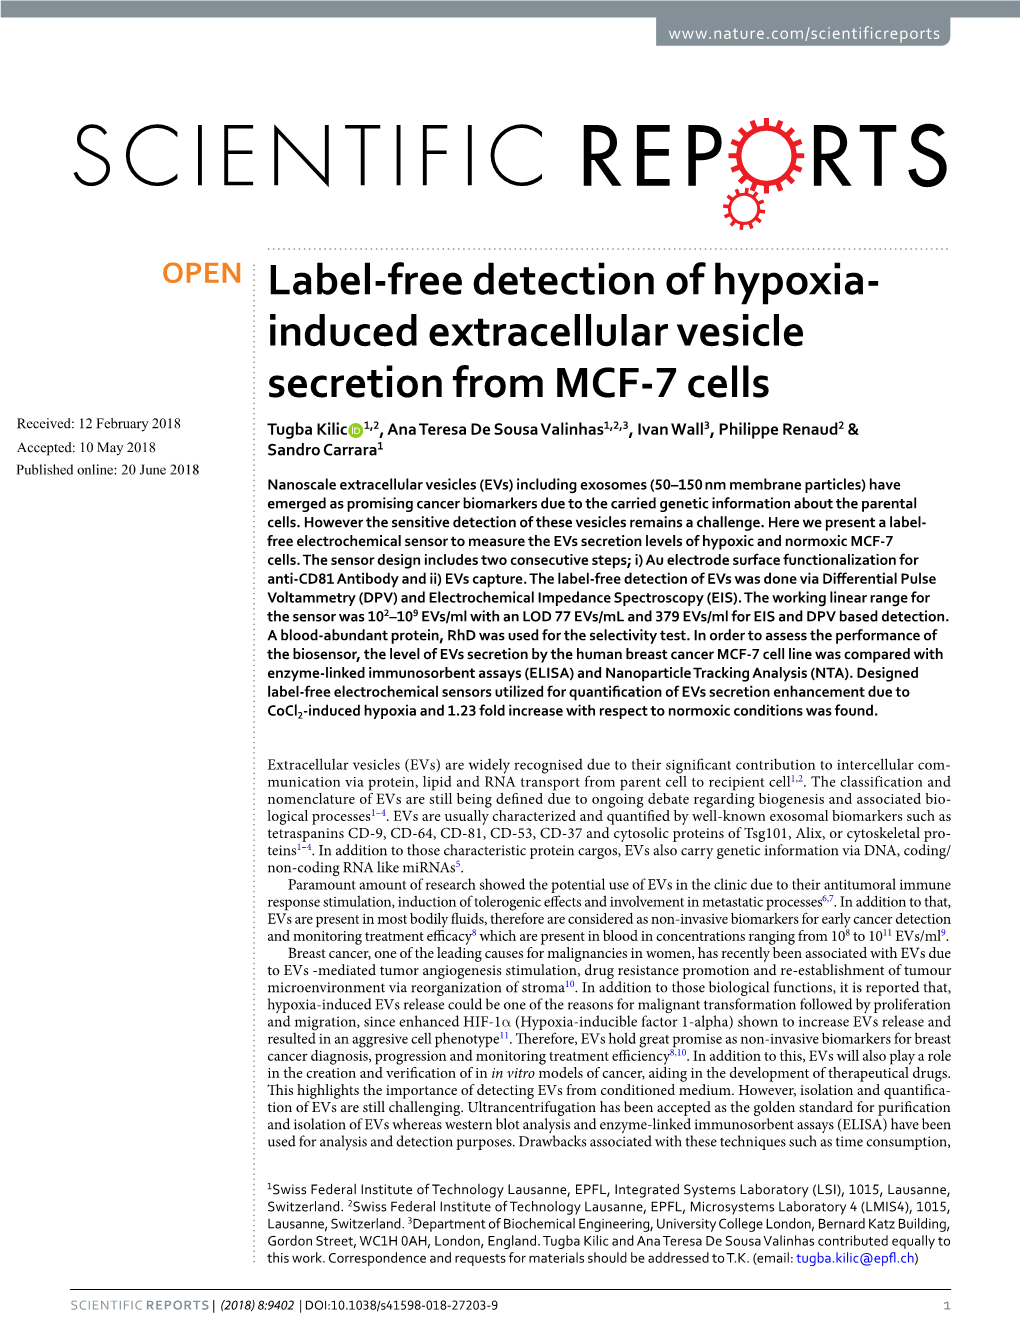 Label-Free Detection of Hypoxia-Induced Extracellular